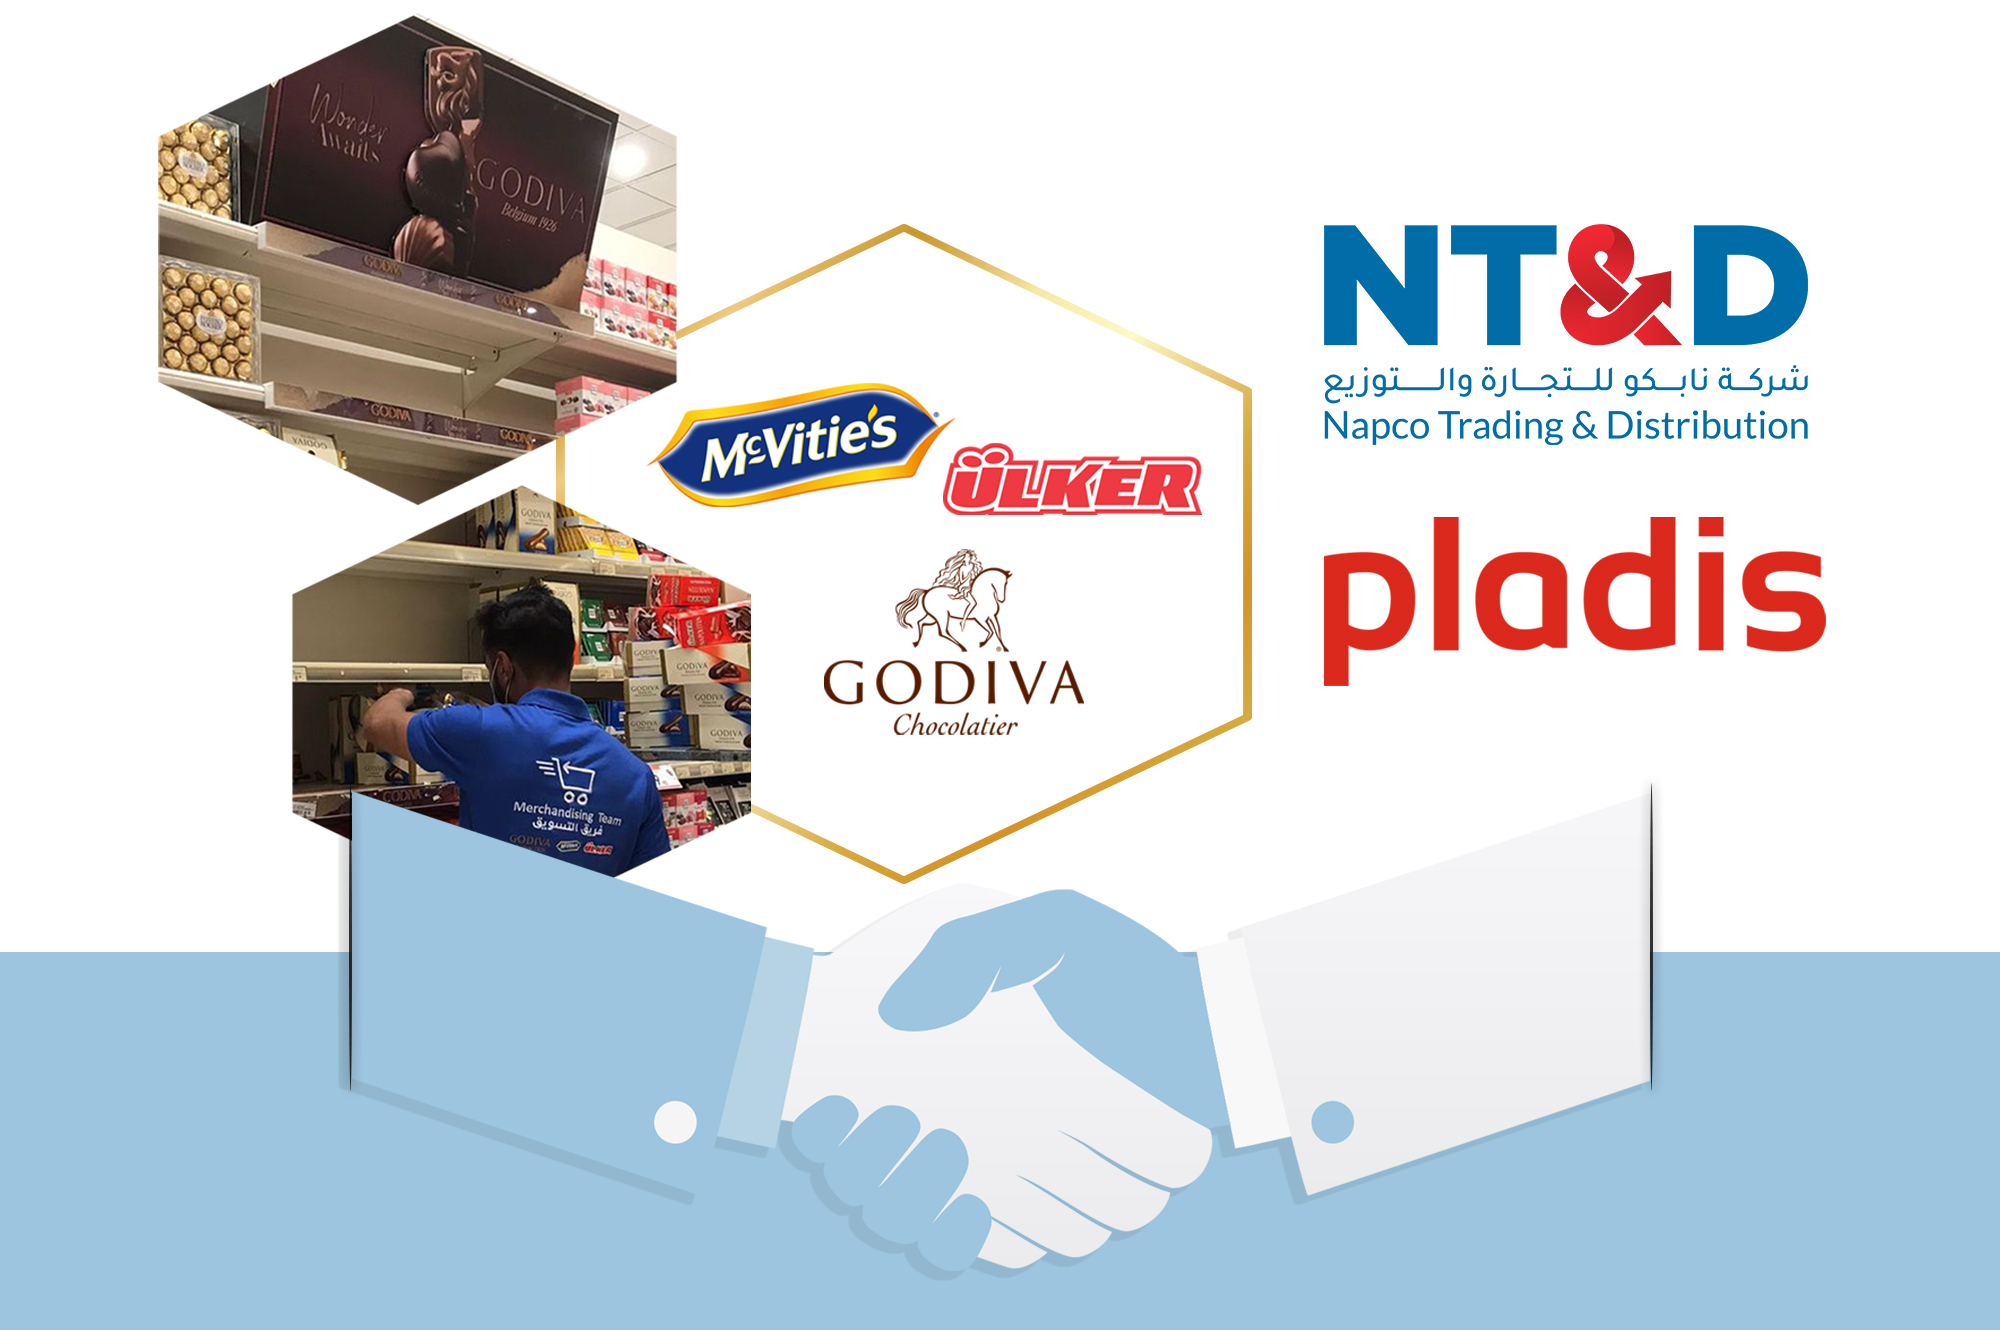 Napco Trading & Distribution – The Local Merchandising Partner For the Products of Pladis International Company in the Kingdom of Saudi Arabia